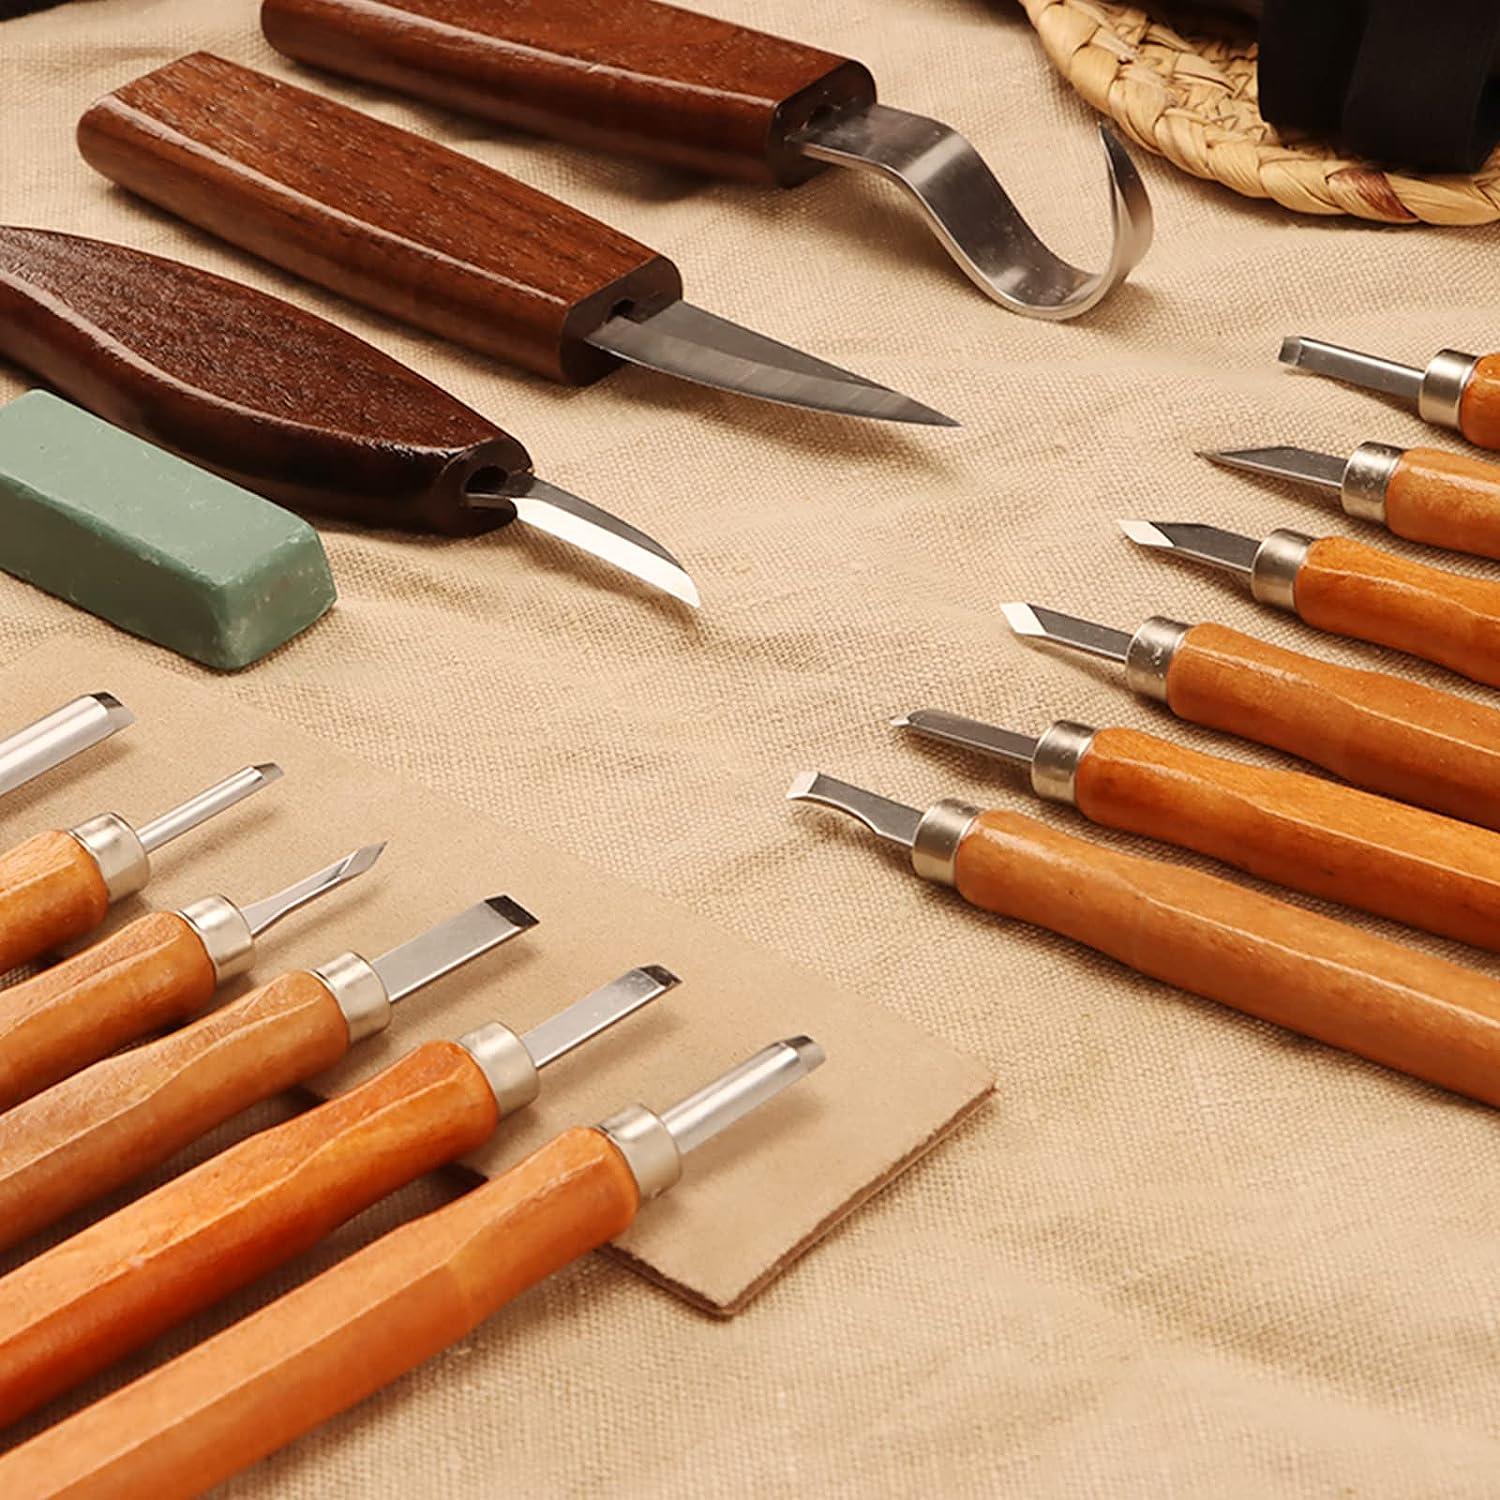  Wood Carving Tools, Wood Carving Knives, 10 in 1 Whittling Wood  Carving Kit for Adult, Kids and Beginners : Arts, Crafts & Sewing